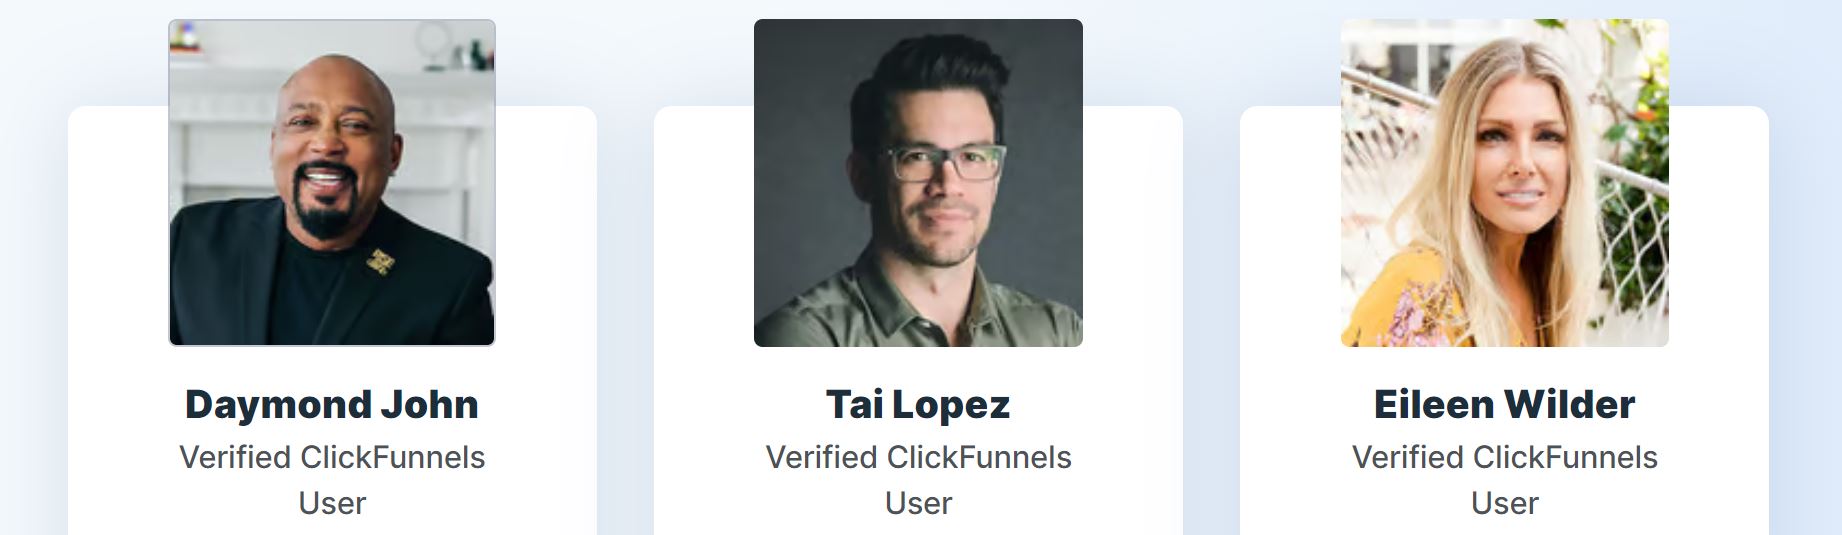 click funnel 2.0 verified user reviews